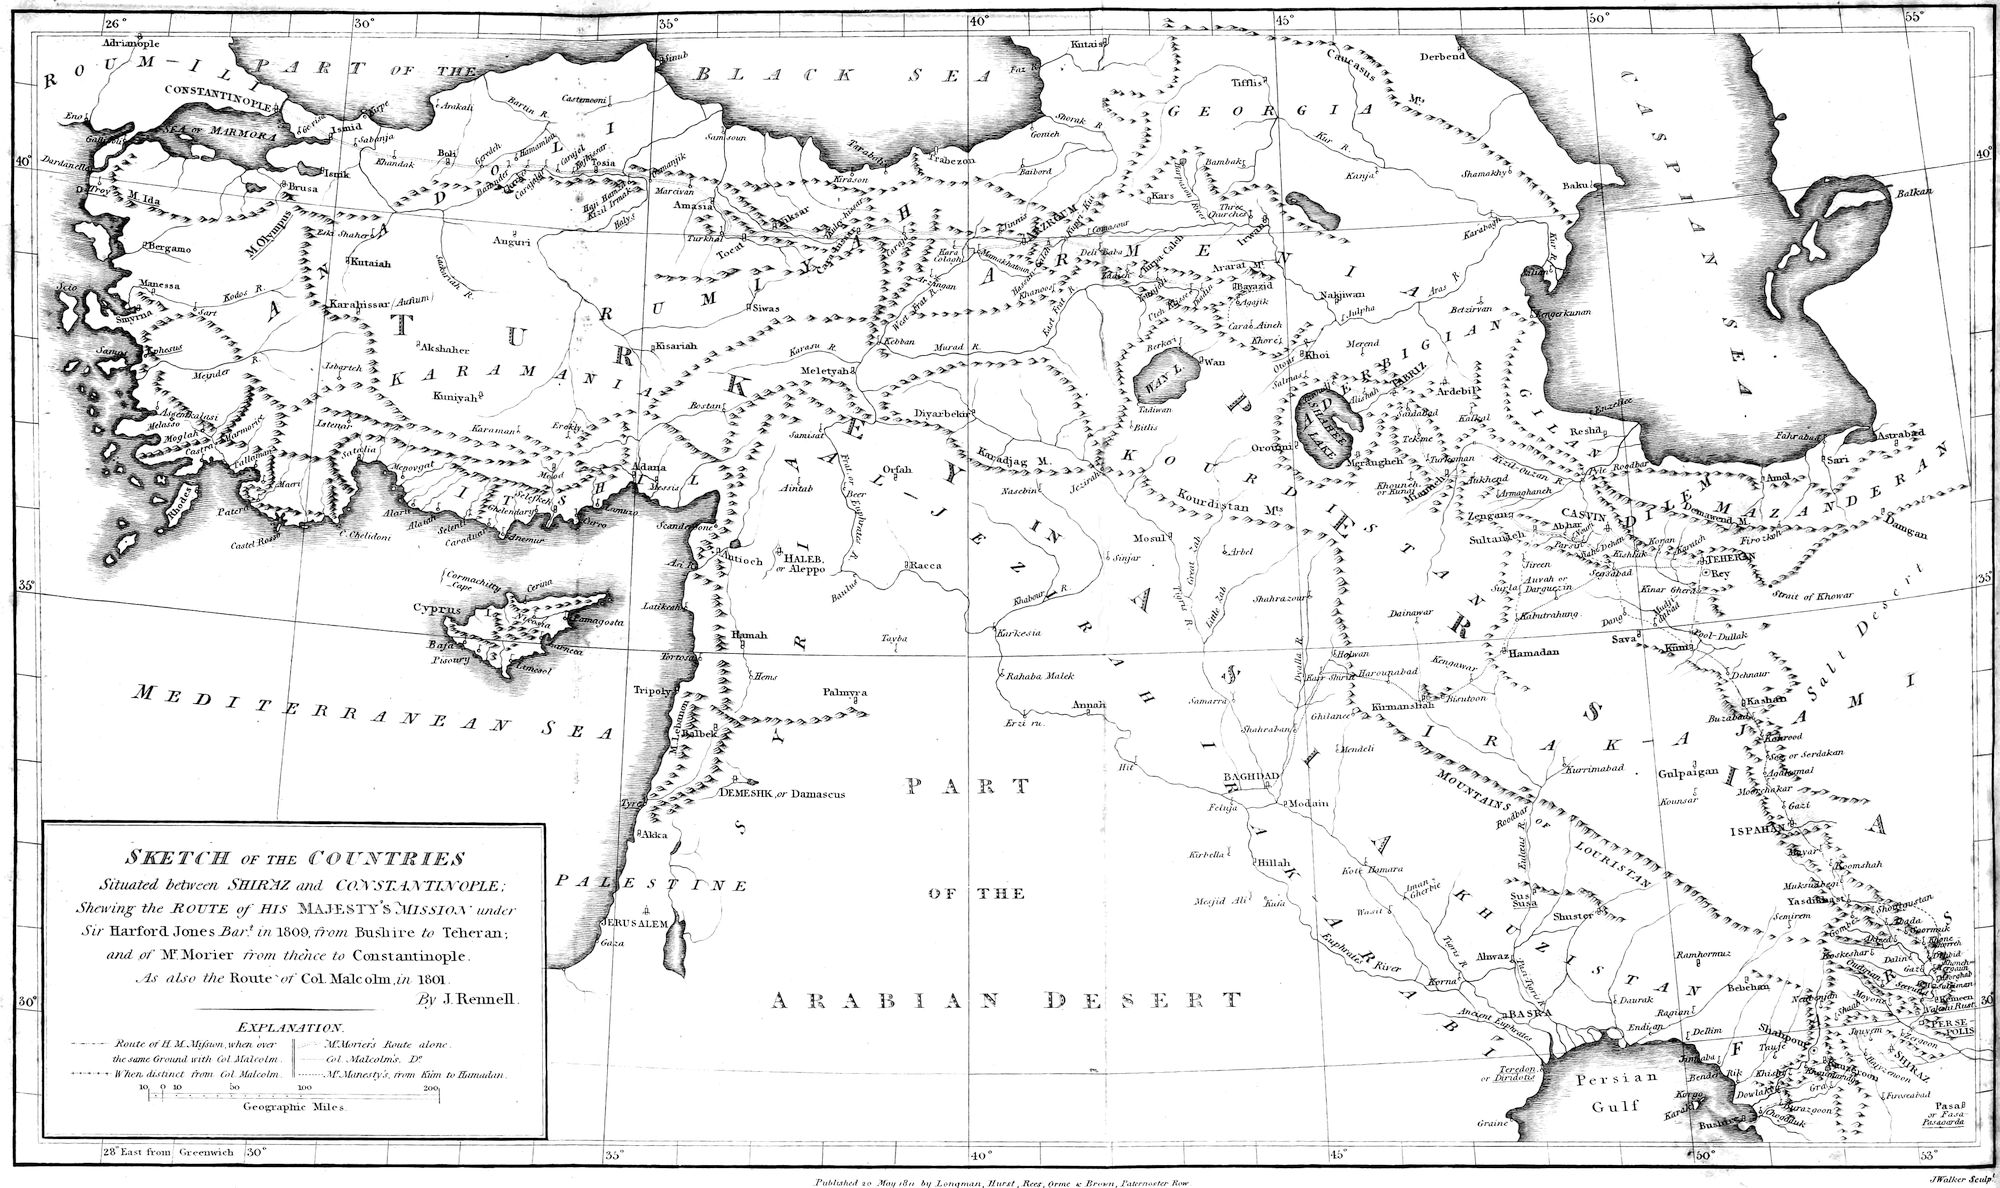 The Project Gutenberg eBook of A Journey through Persia, Armenia, and Asia  Minor, to Constantinople, in the Years 1808 and 1809, by James Justinian  Morier